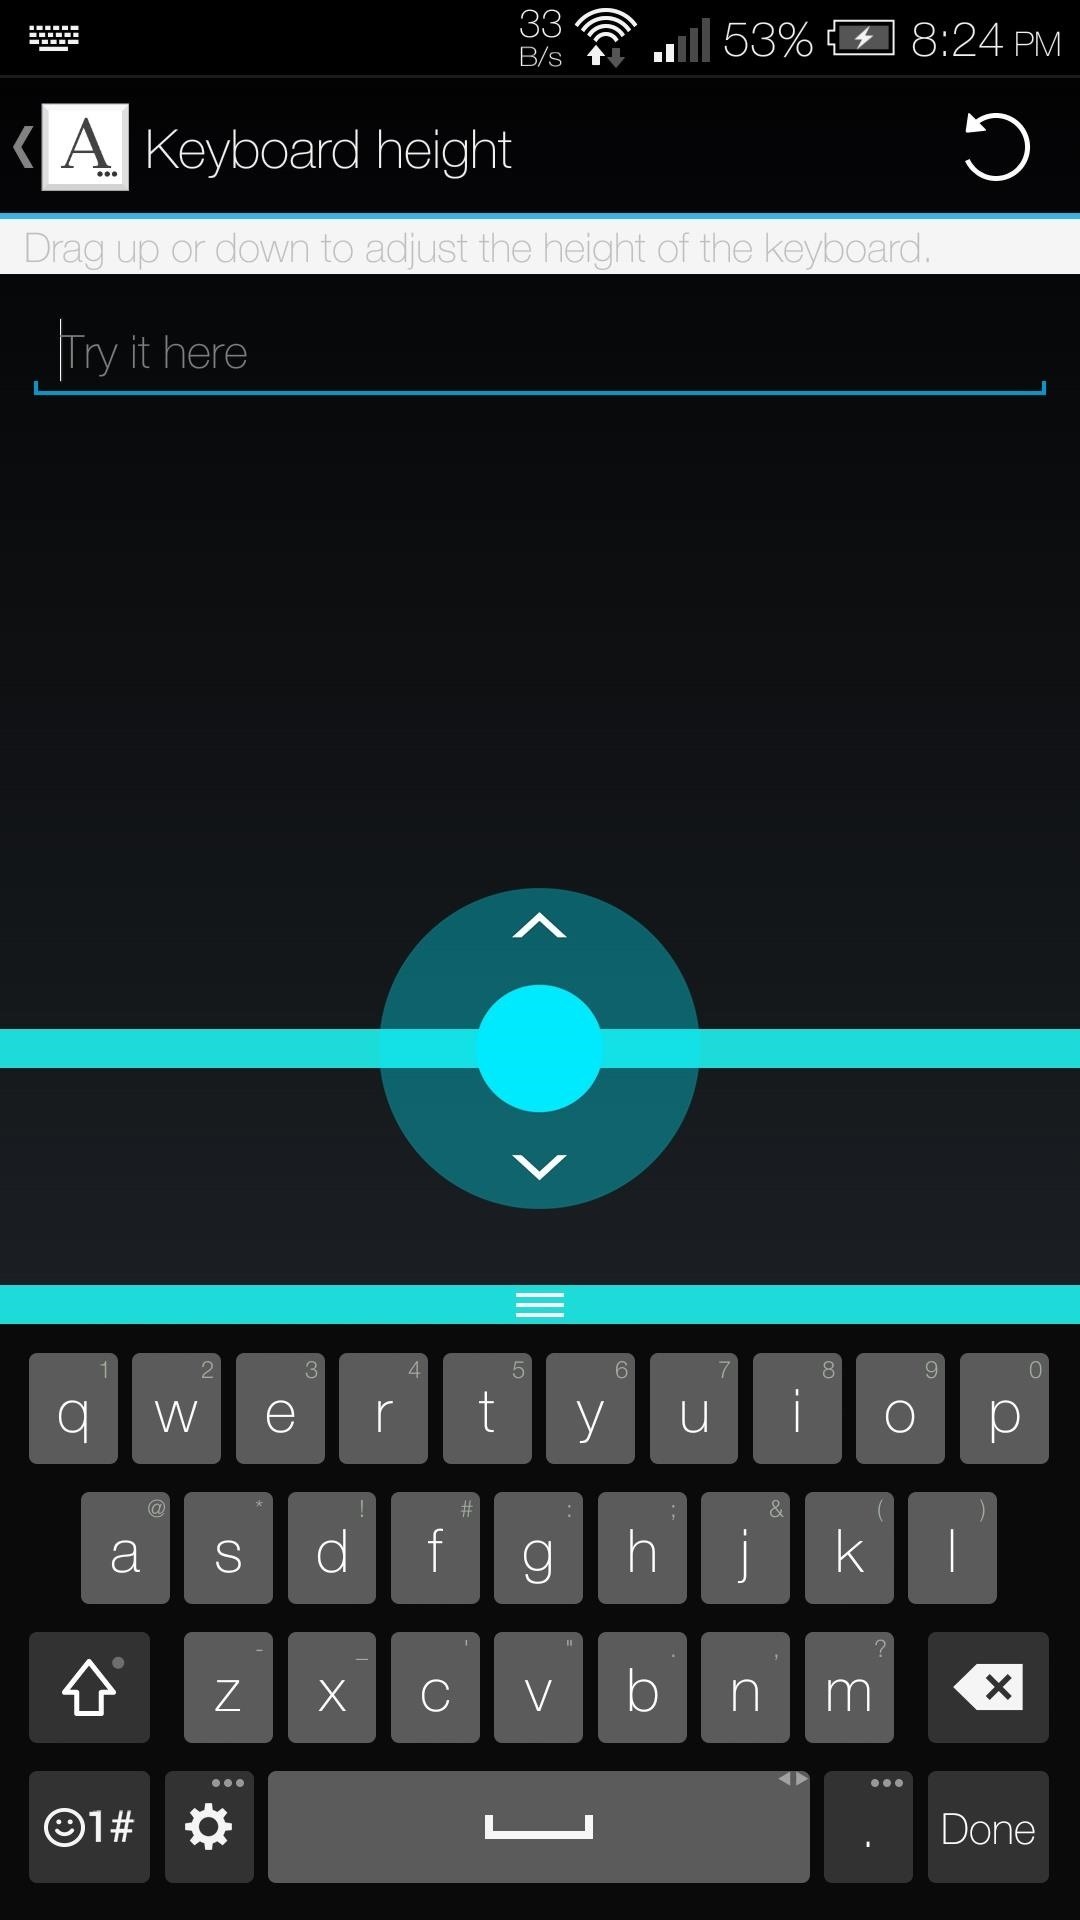 How to Get the LG G3 Exclusive Keyboard, Sounds, & Wallpapers on Any Android Phone or Tablet